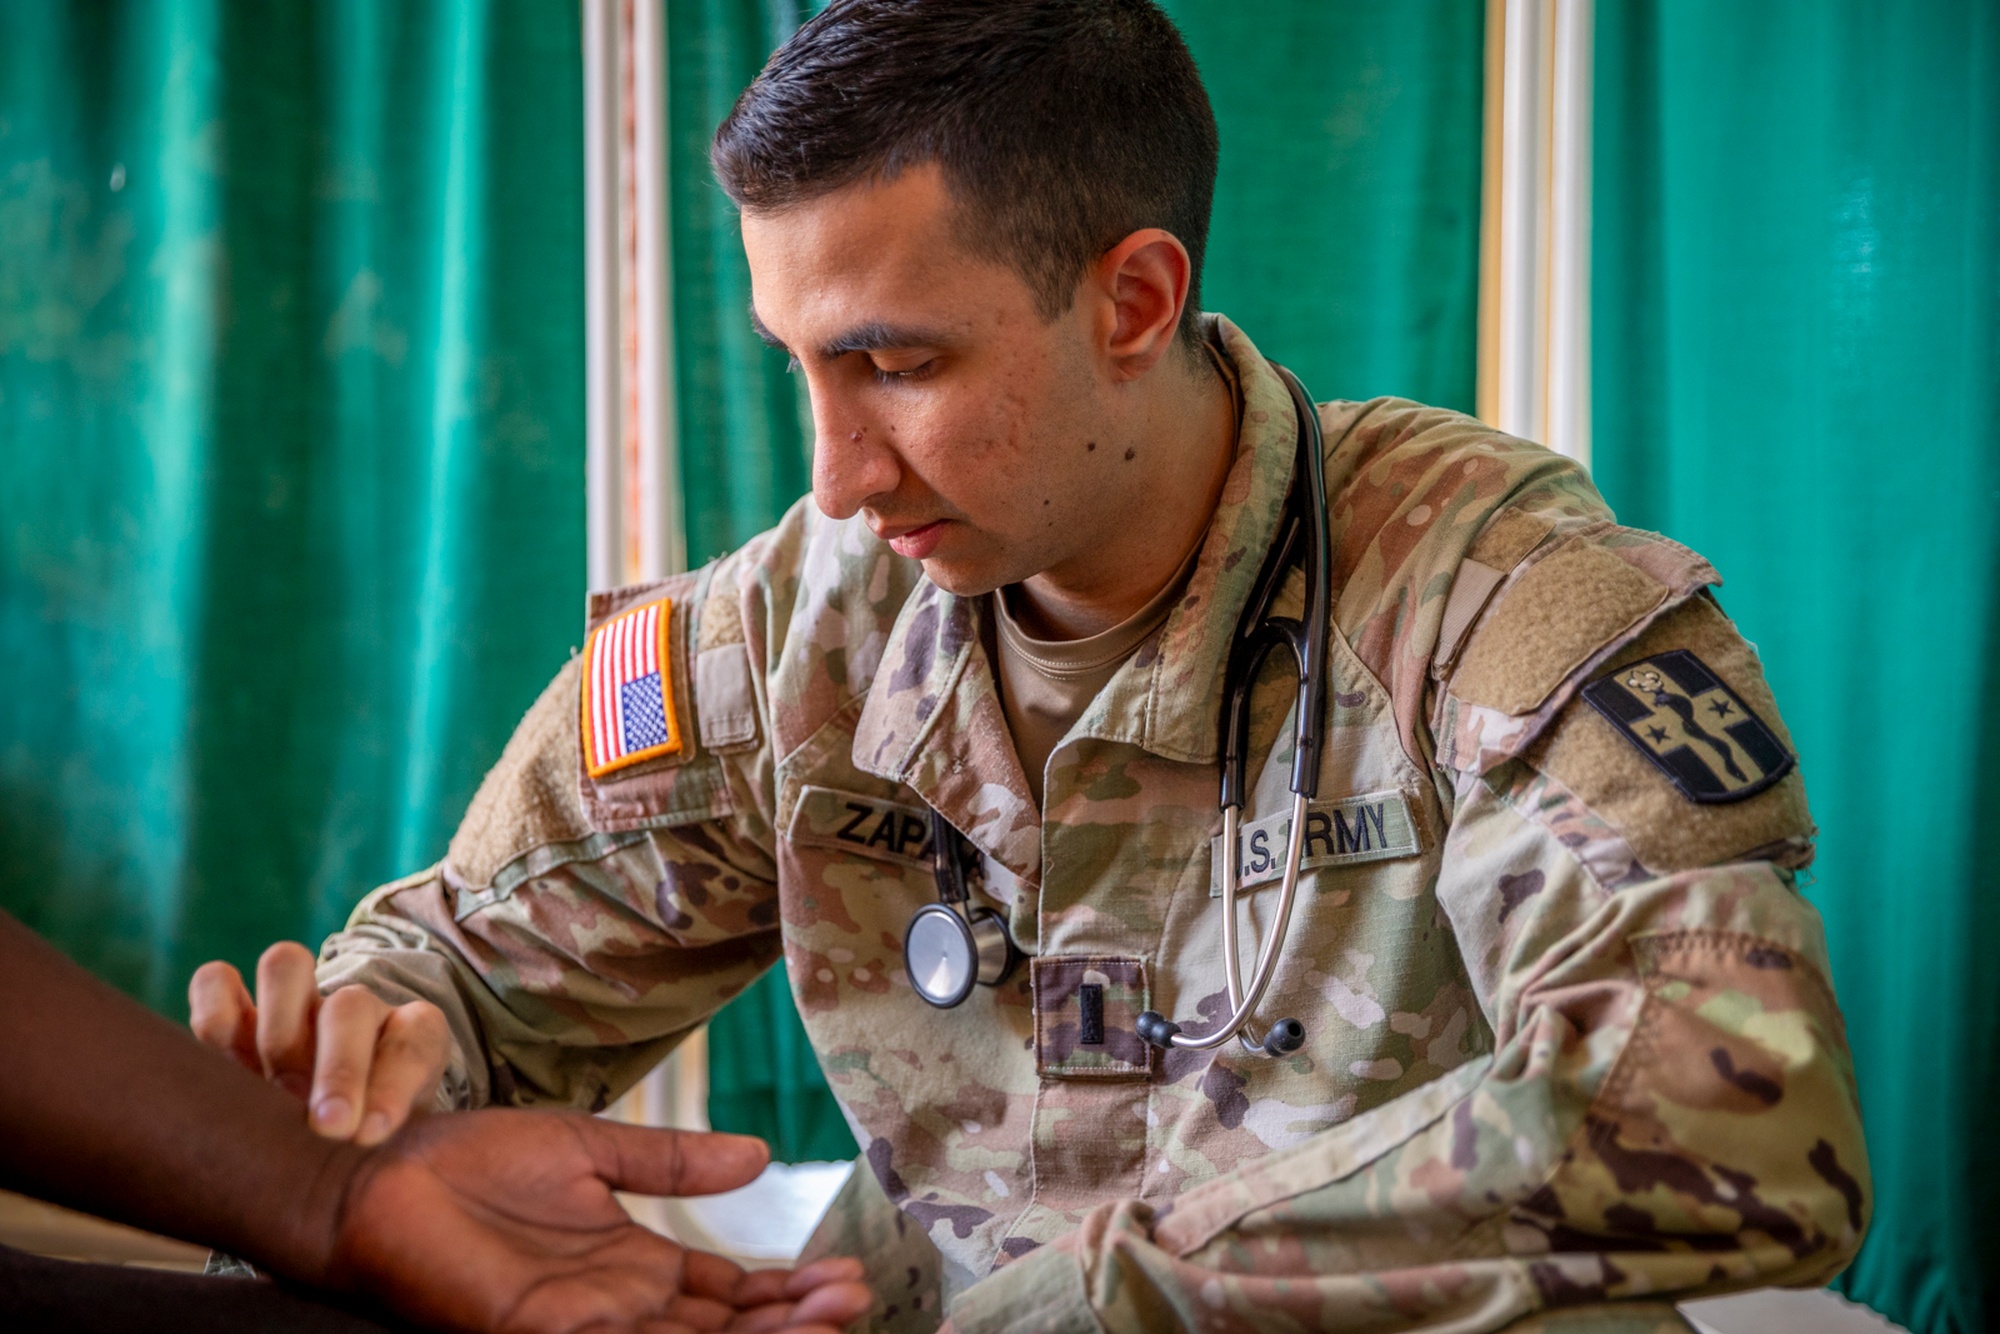 U.S. Army Reserve soldiers from the 176th Medical Brigade participated in #JustifiedAccord 2024 in Kenya. (JA24) is U.S. Africa Command (AFRICOM) largest exercise in East Africa, running from Feb. 26 - March 7. Led by U.S. Army Southern European Task Force, Africa and hosted in Kenya, this year's exercise incorporated personnel and units from 23 nations. This multinational exercise builds readiness for the U.S. joint force, prepares regional partners for UN and AU mandated missions, and increases multinational interoperability in support of humanitarian assistance, disaster response and crisis response.

Army Medicine U.S. Army Europe and Africa U.S. Embassy Nairobi U.S. Department of State: Bureau of African Affairs